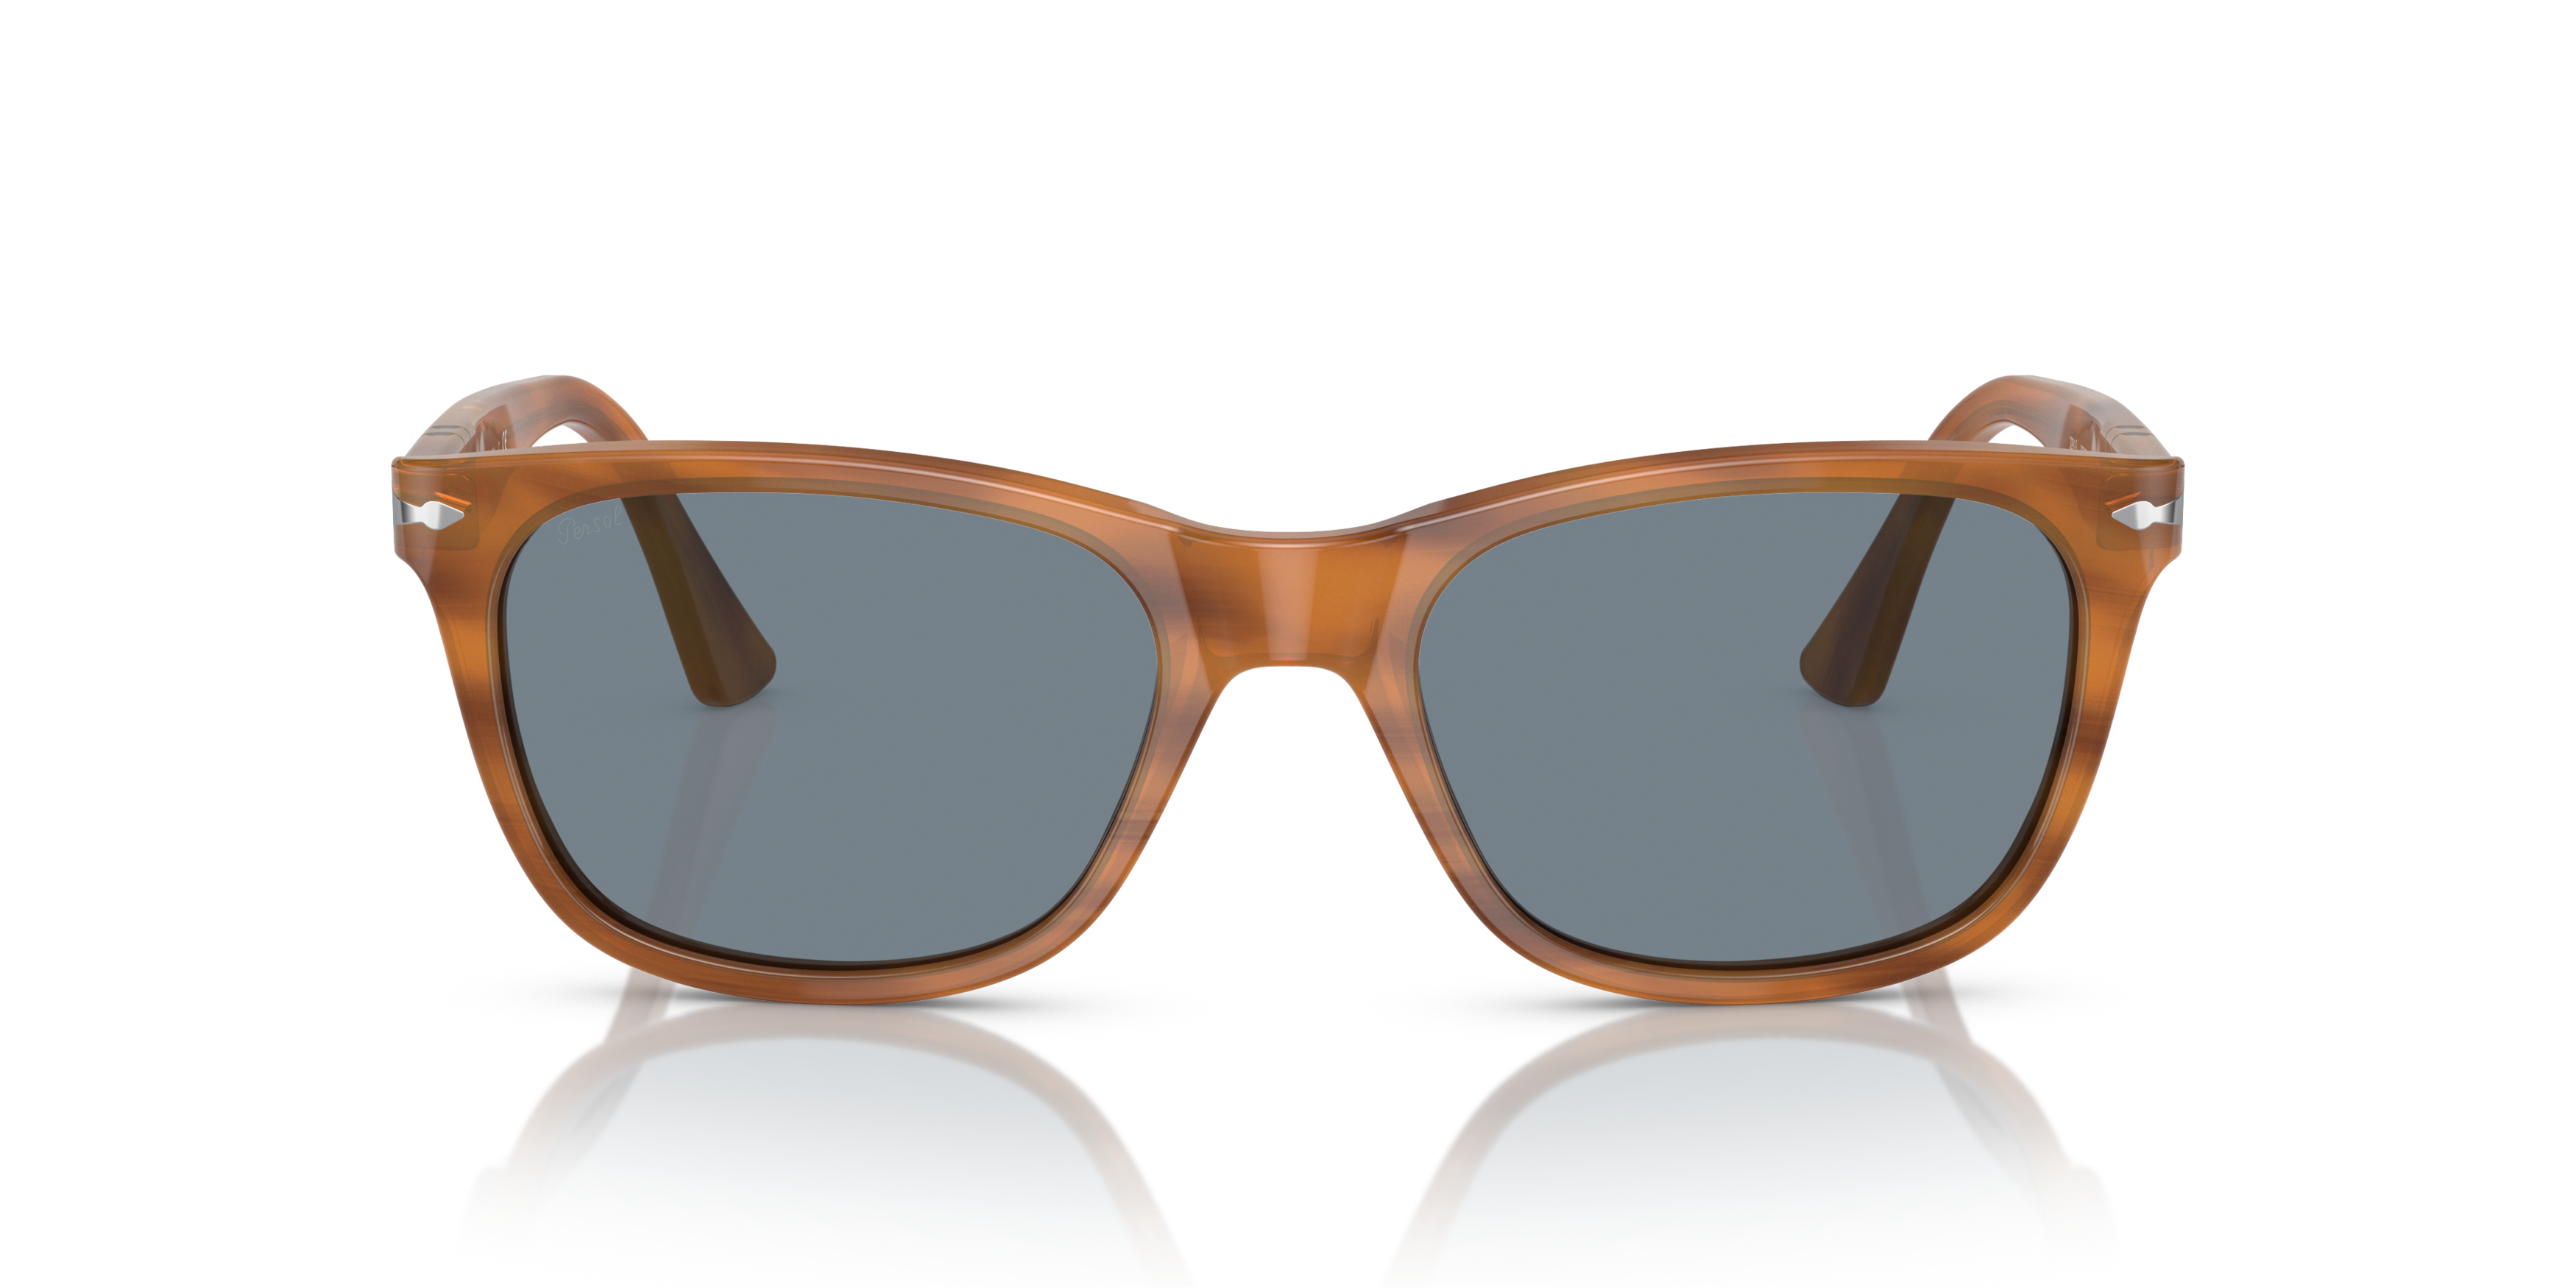 [products.image.front] Persol 0PO3291S 960/56 Solbriller